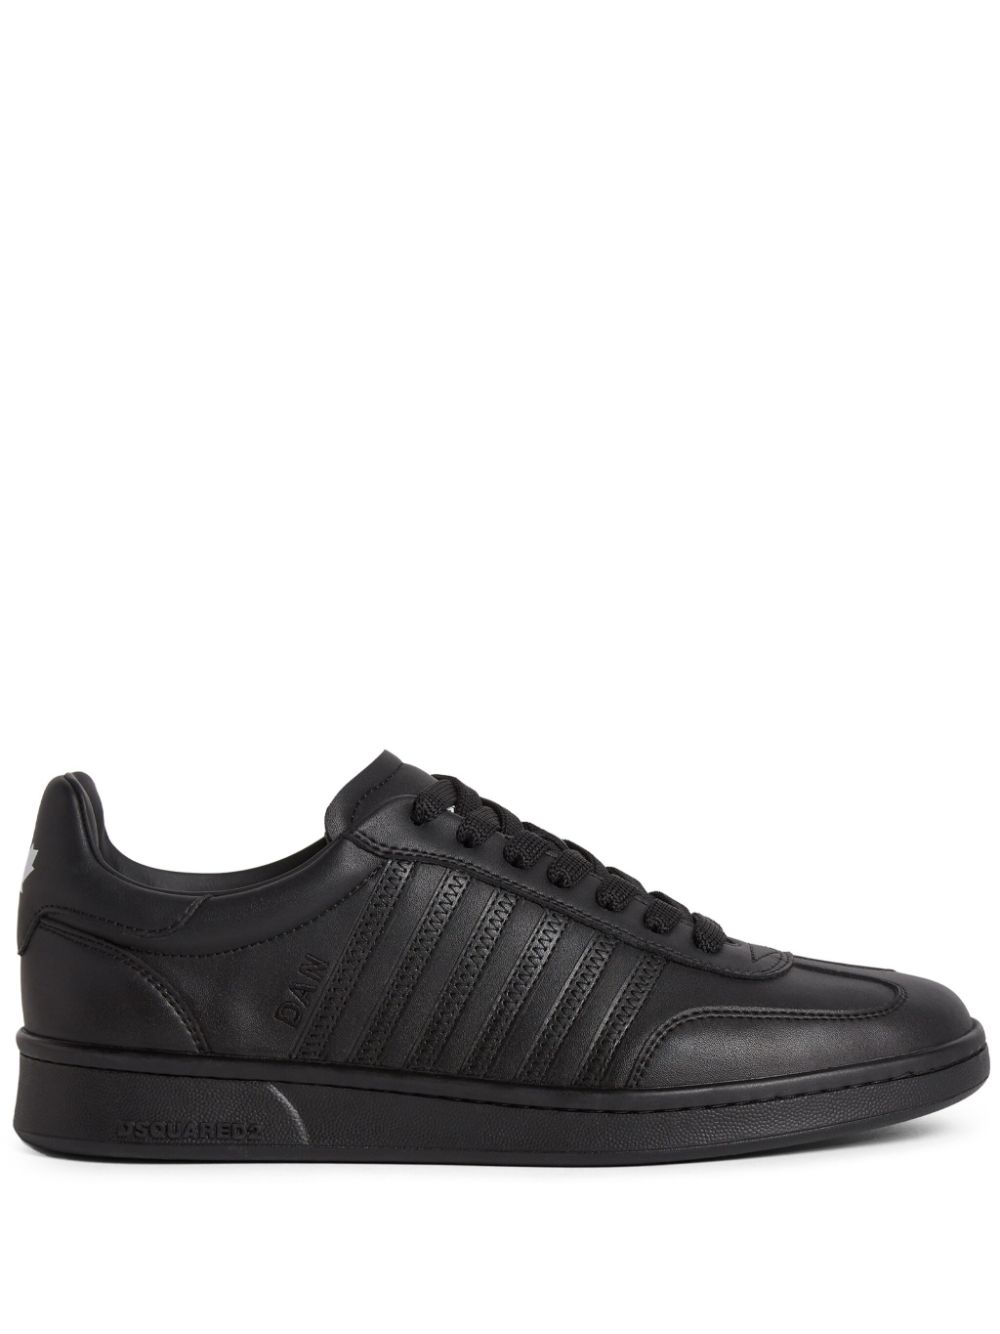 Dsquared2 Boxer leather sneakers Black